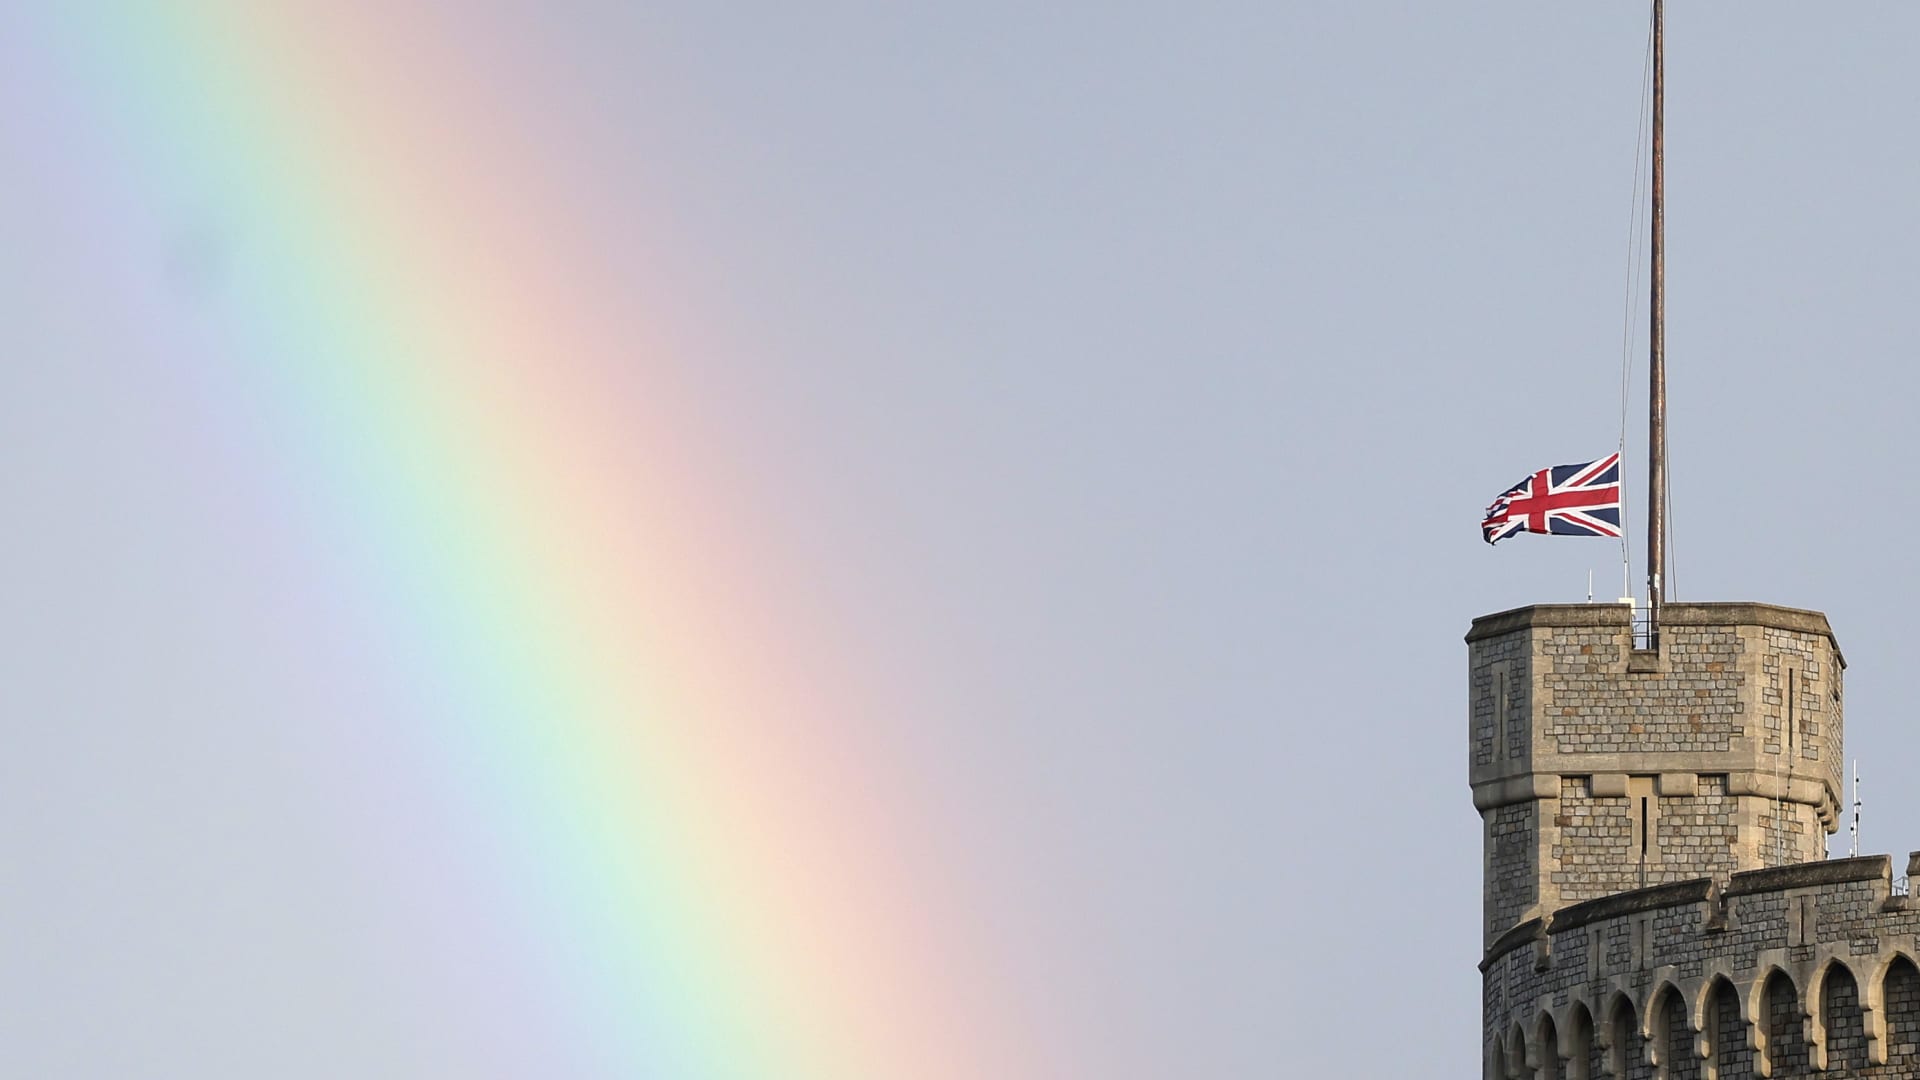 The Union flag is lowered on Windsor Castle as a rainbow covers the sky on September 08, 2022 in Windsor, England. Elizabeth Alexandra Mary Windsor was born in Bruton Street, Mayfair, London on 21 April 1926.